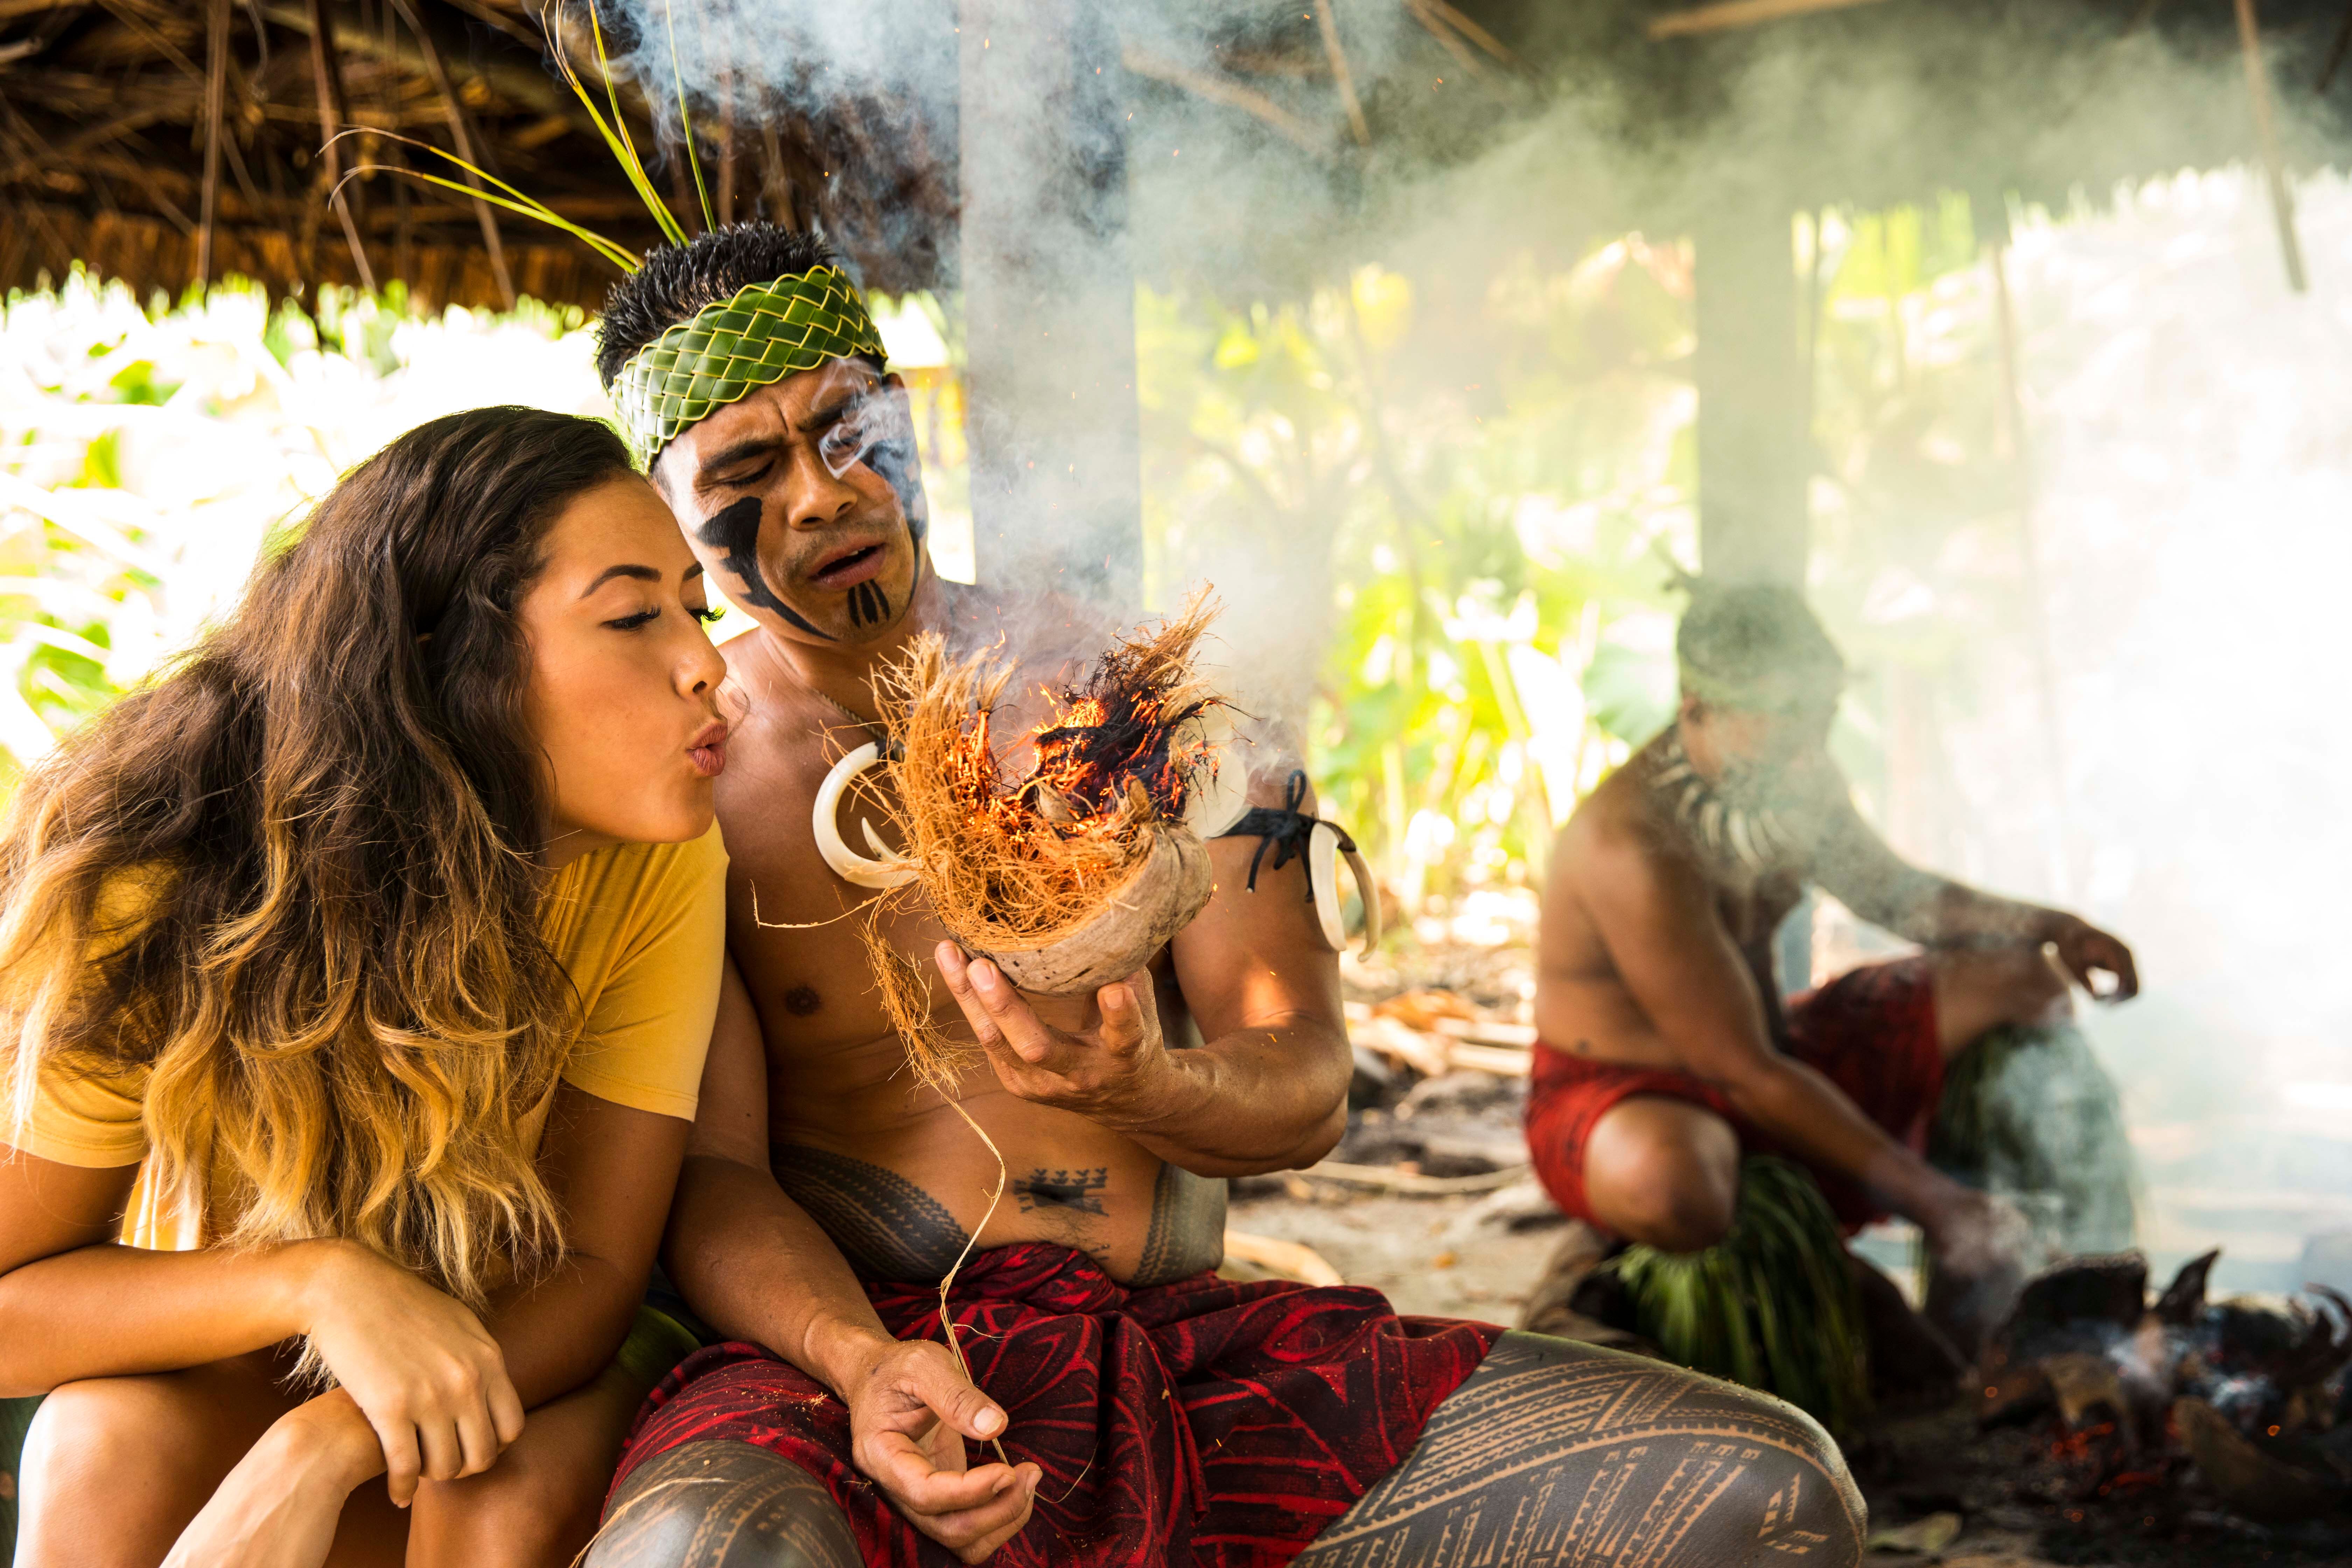 A one-of-a-kind hands-on Polynesian cooking experience